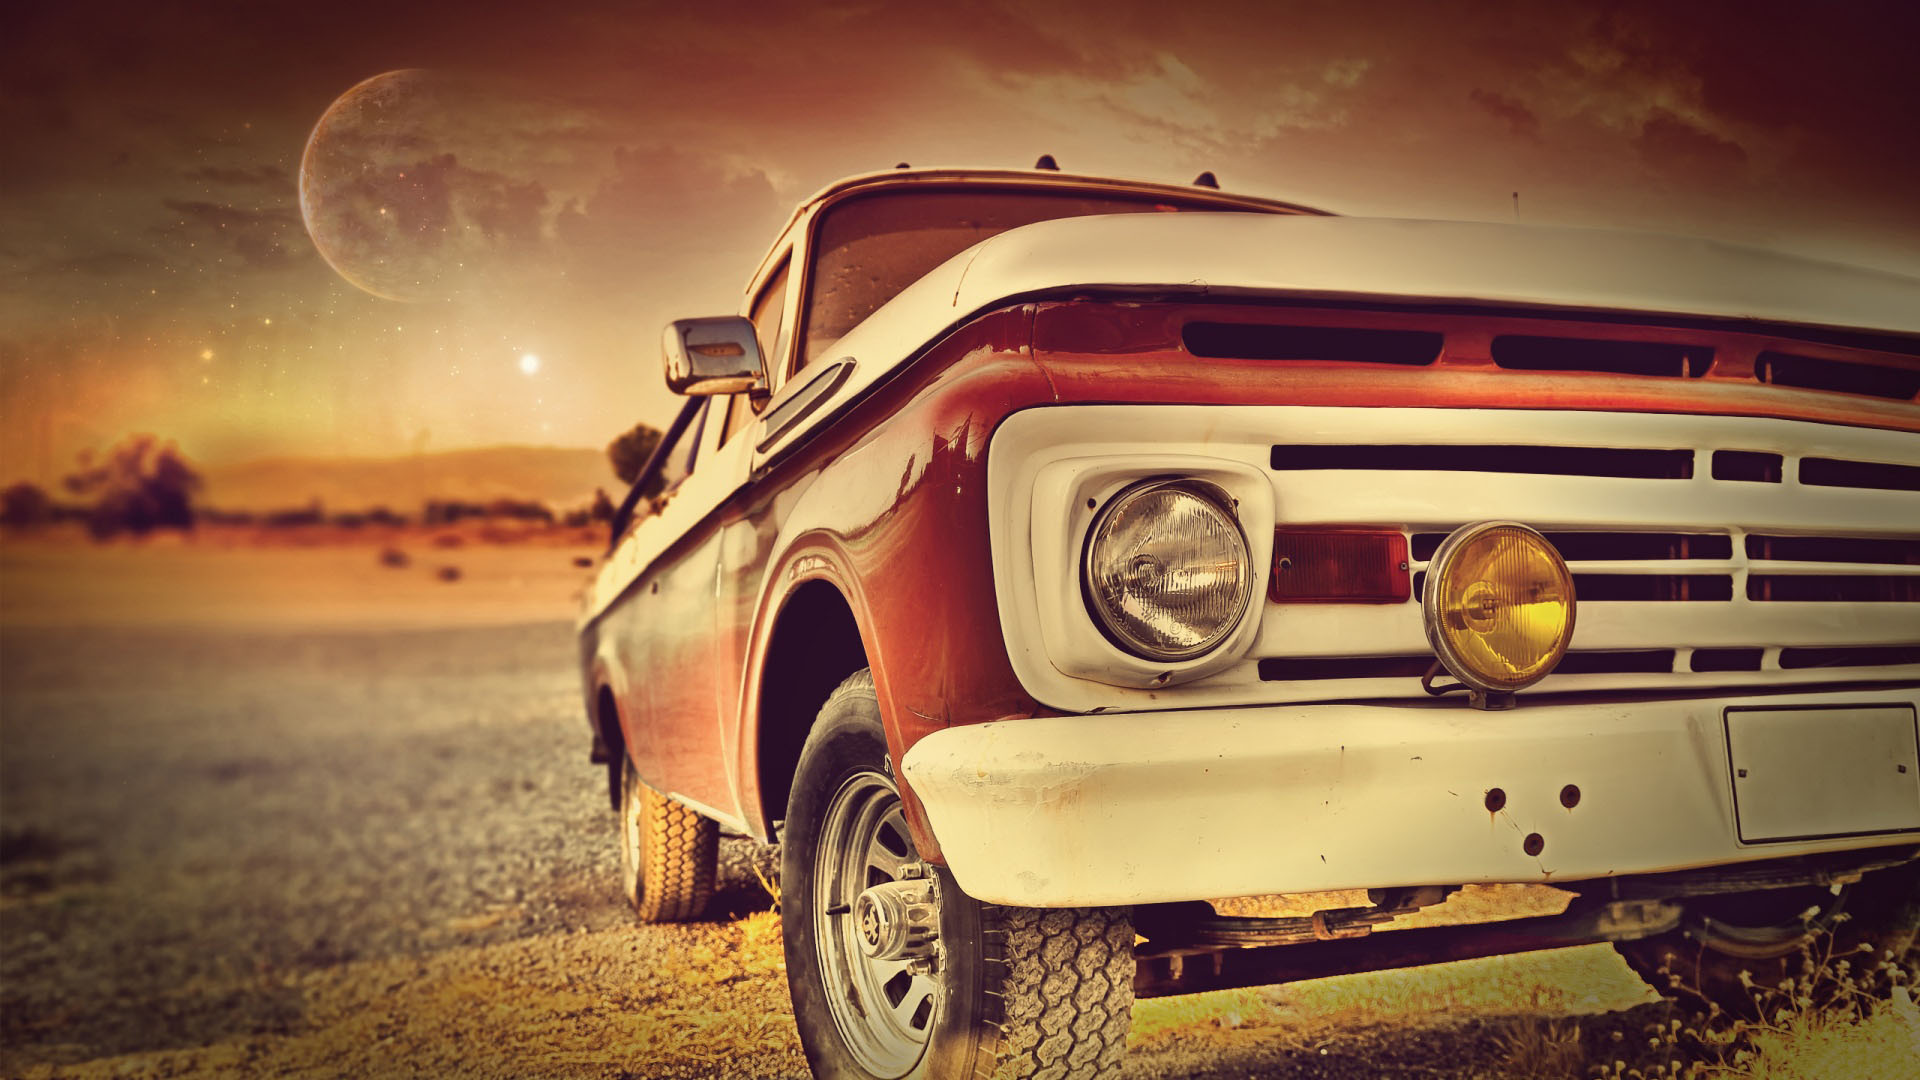 Vintage red car in the sunset - HD wallpaper old car